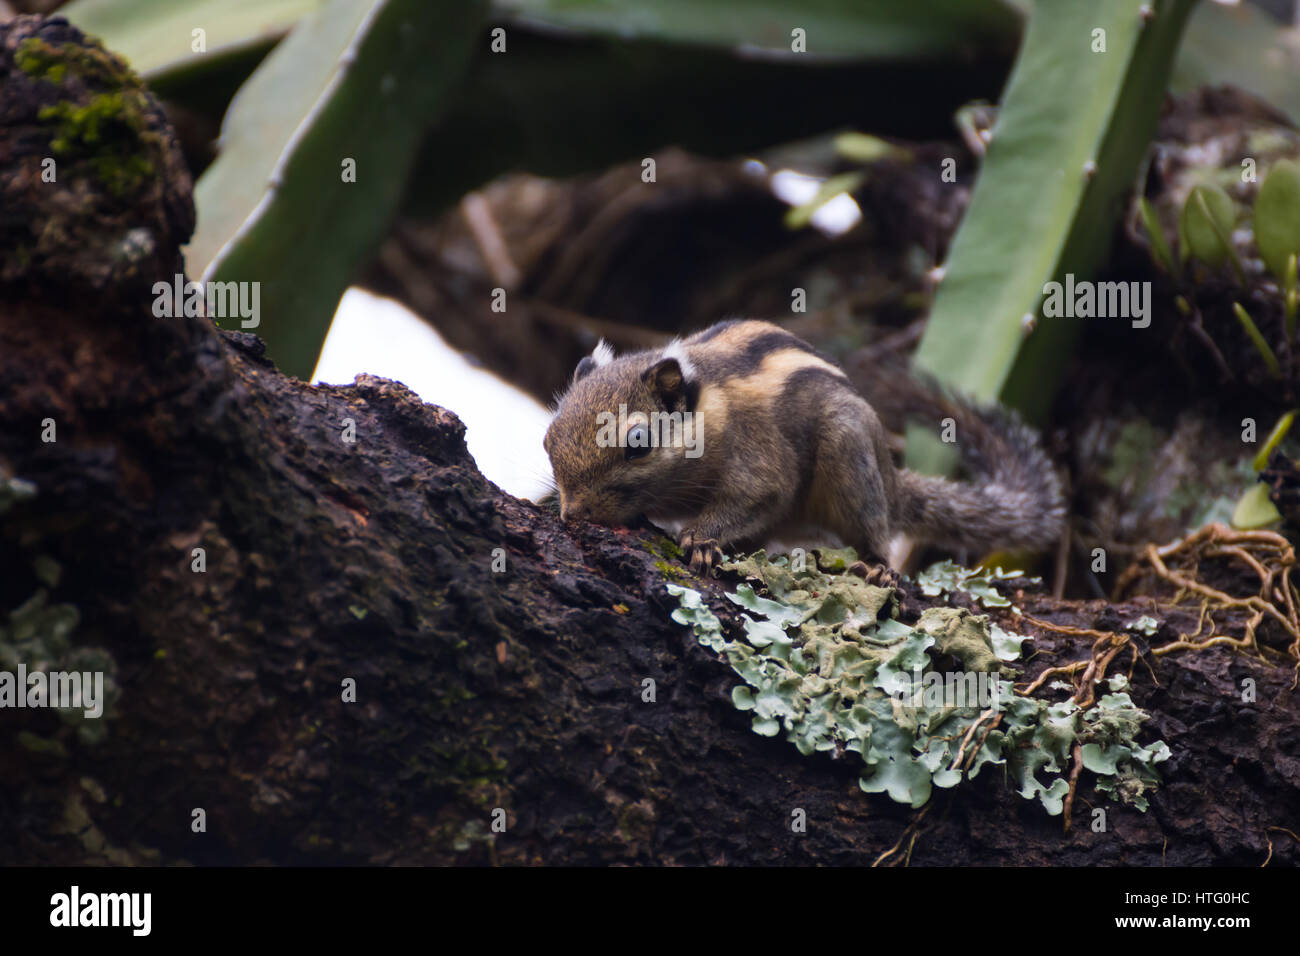 Himalayan striped squirrel on a branch Stock Photo